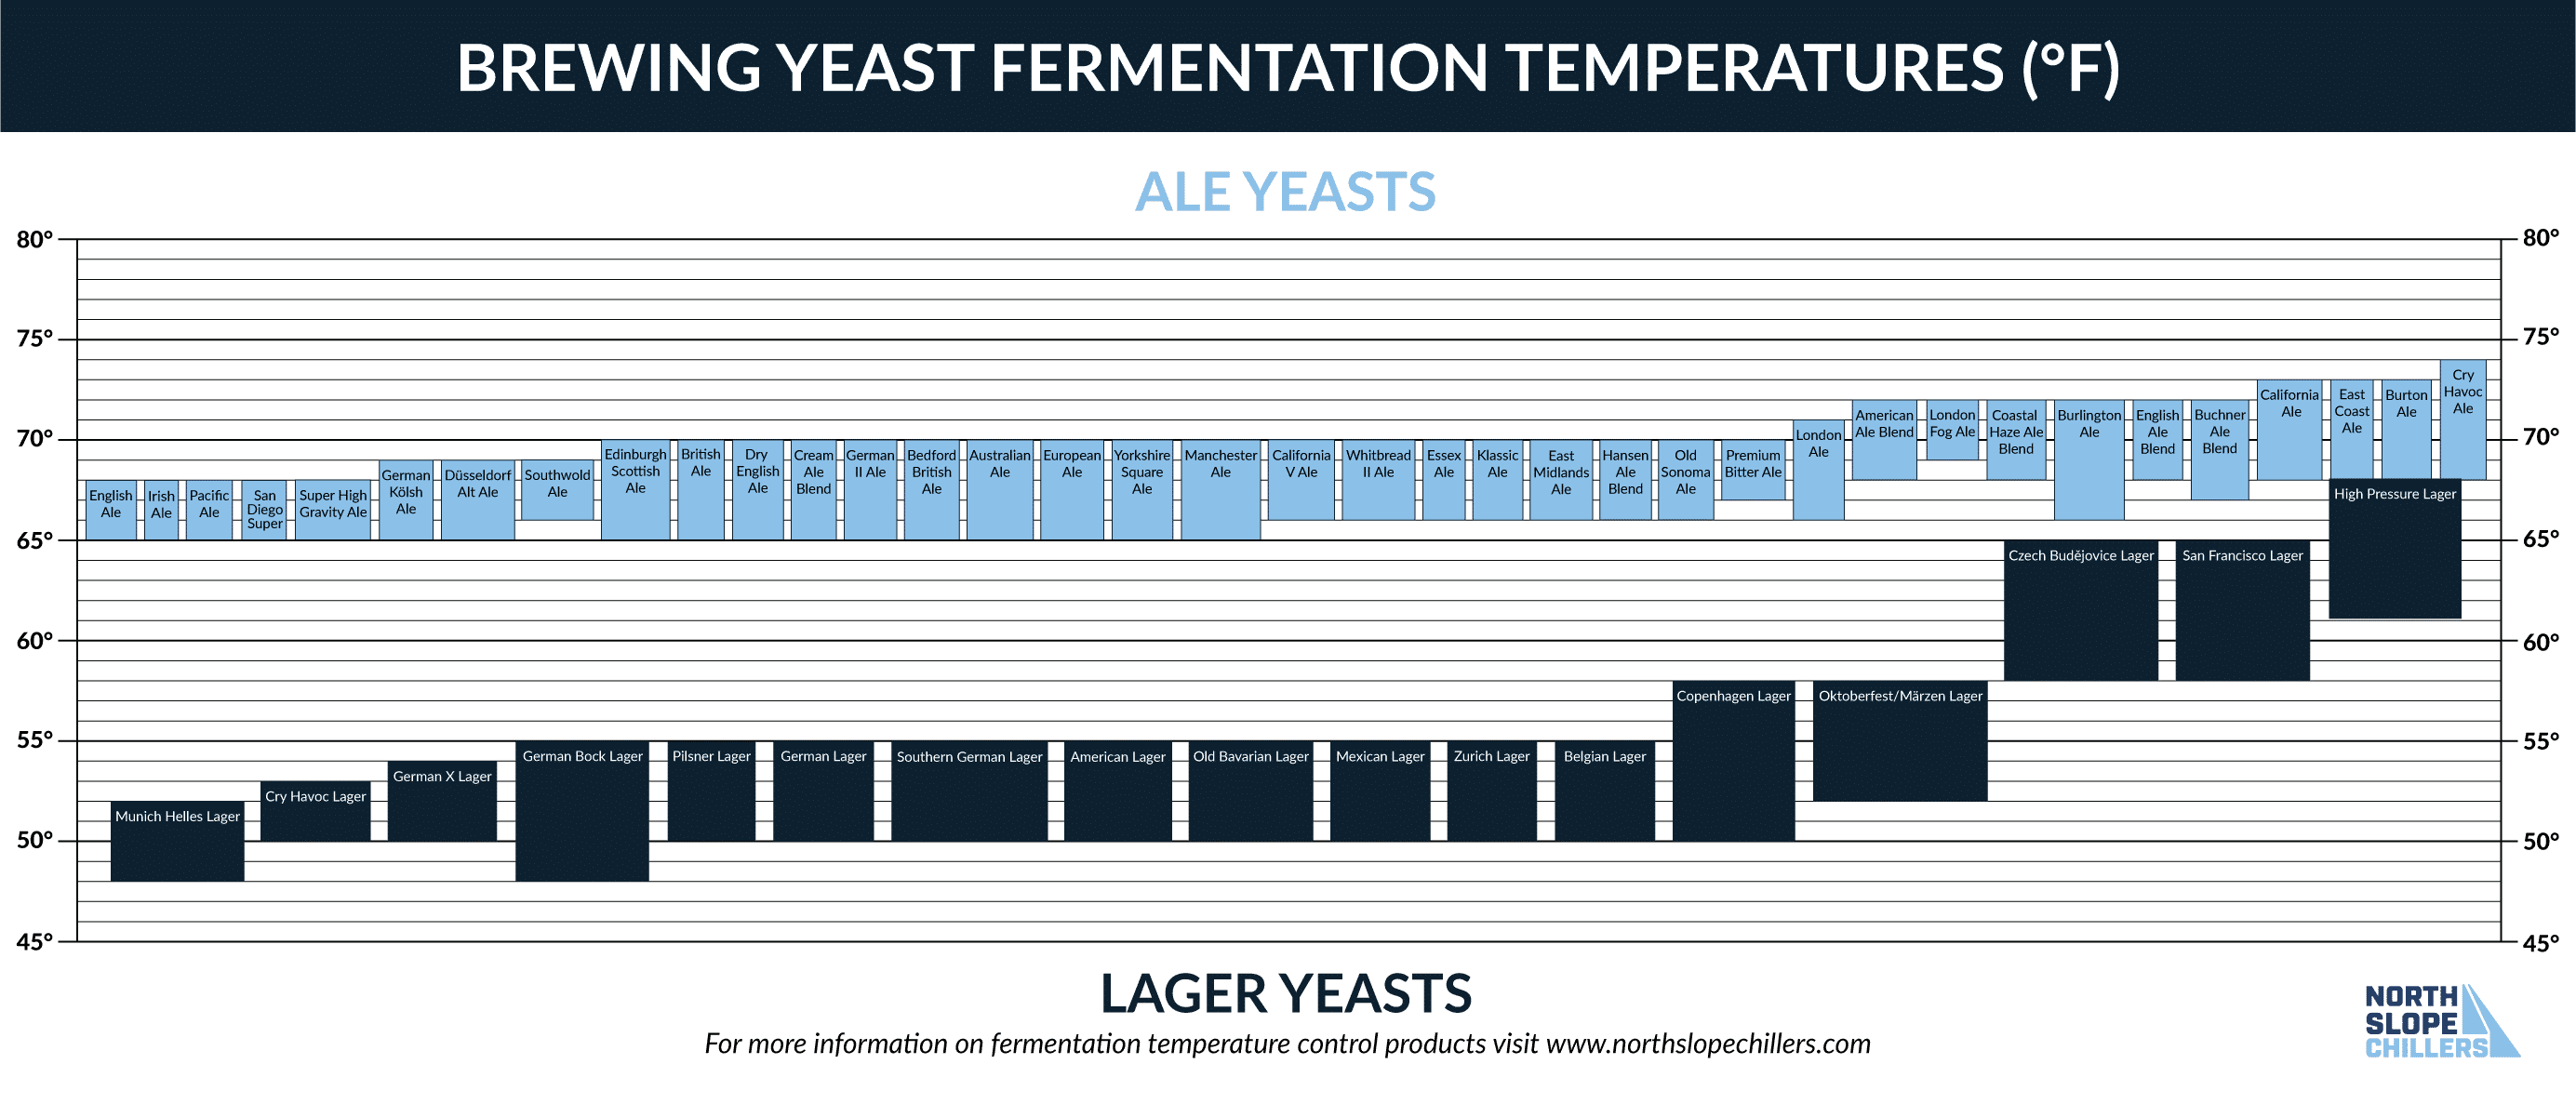 https://northslopechillers.com/wp-content/uploads/2019/05/Brewing-Temperature-Chart-02.png